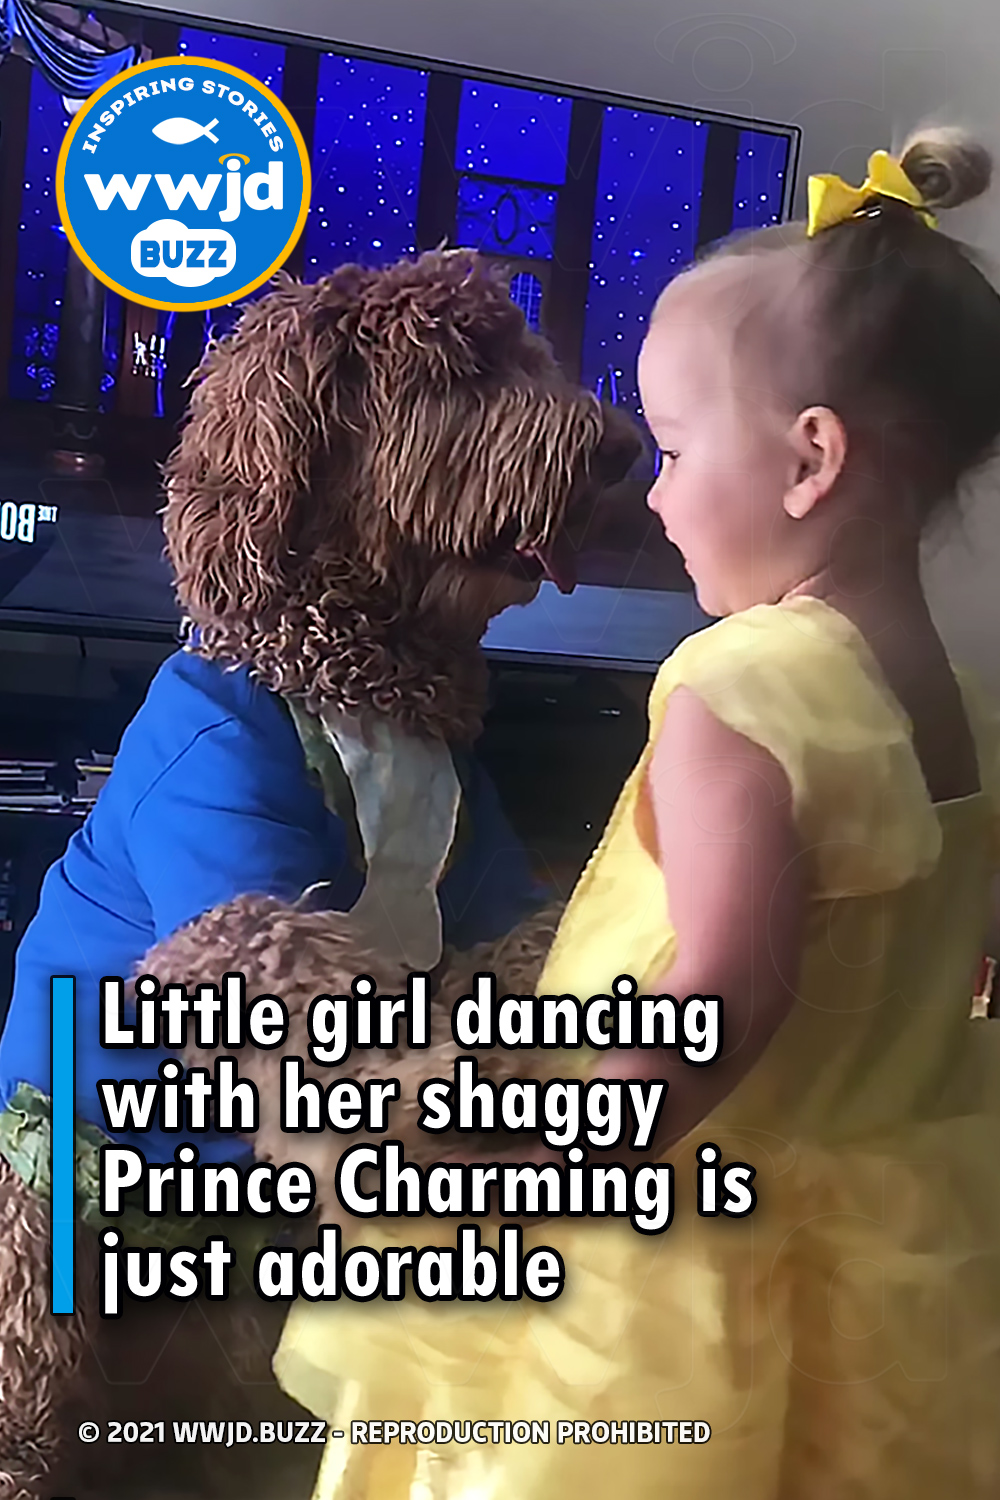 Little girl dancing with her shaggy Prince Charming is just adorable